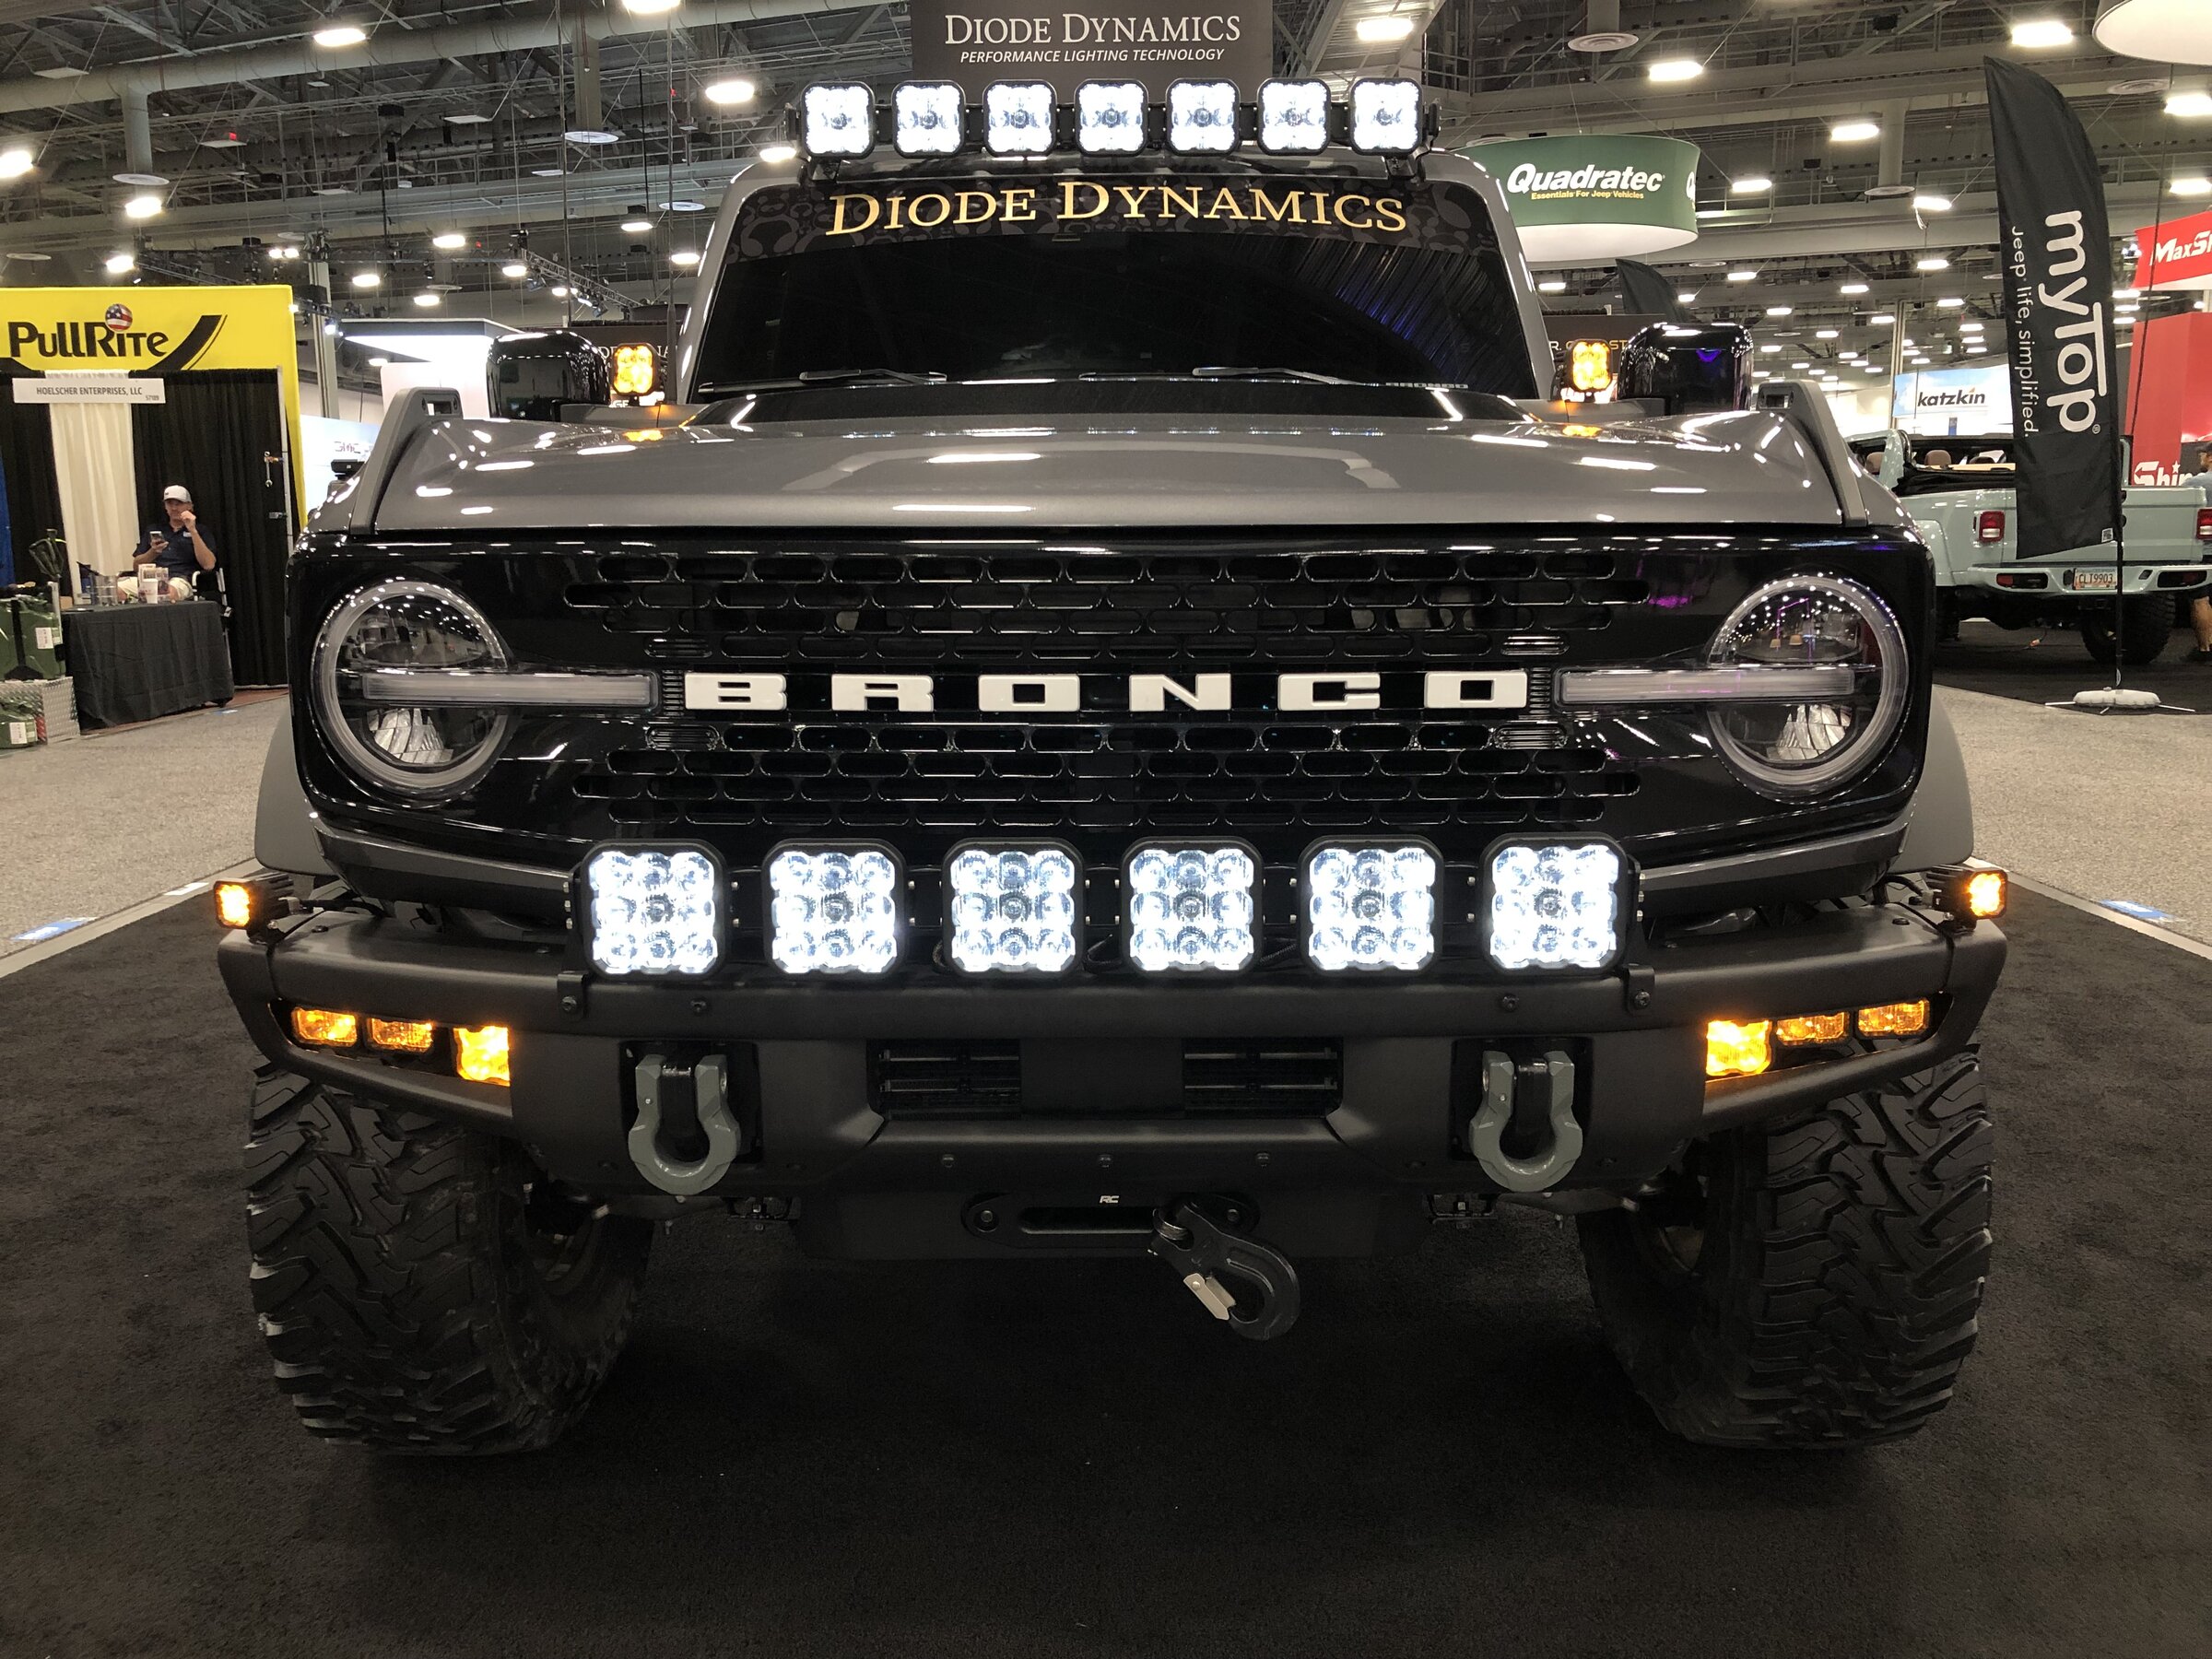 Ford Bronco Which 40 or 50 inch light bars are you planning or using? IMG-4193